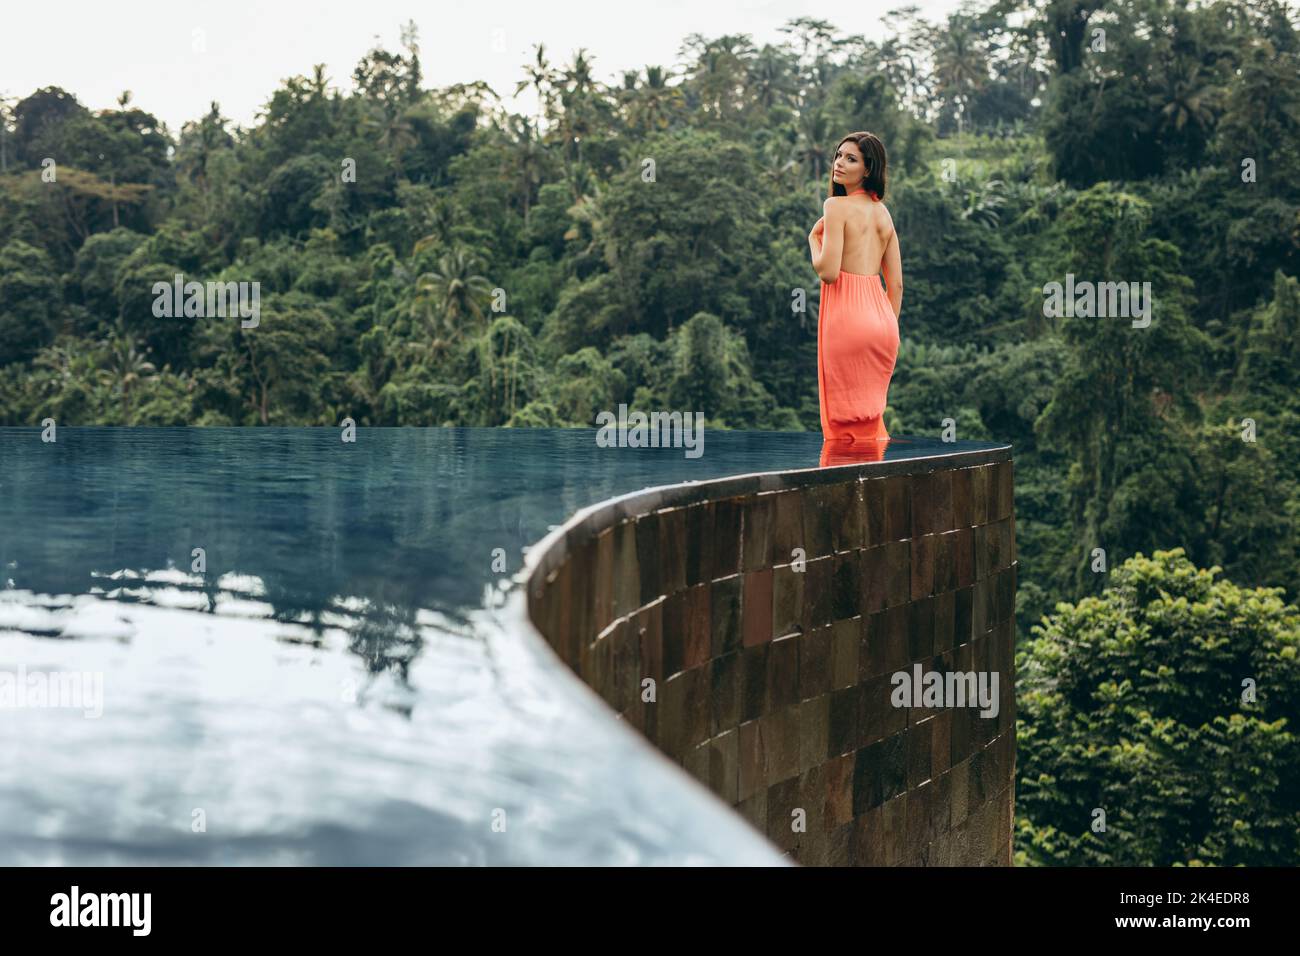 Shot of attractive young woman standing in infinity pool of holiday resort. Caucasian female model in orange dress looking over shoulder. Stock Photo